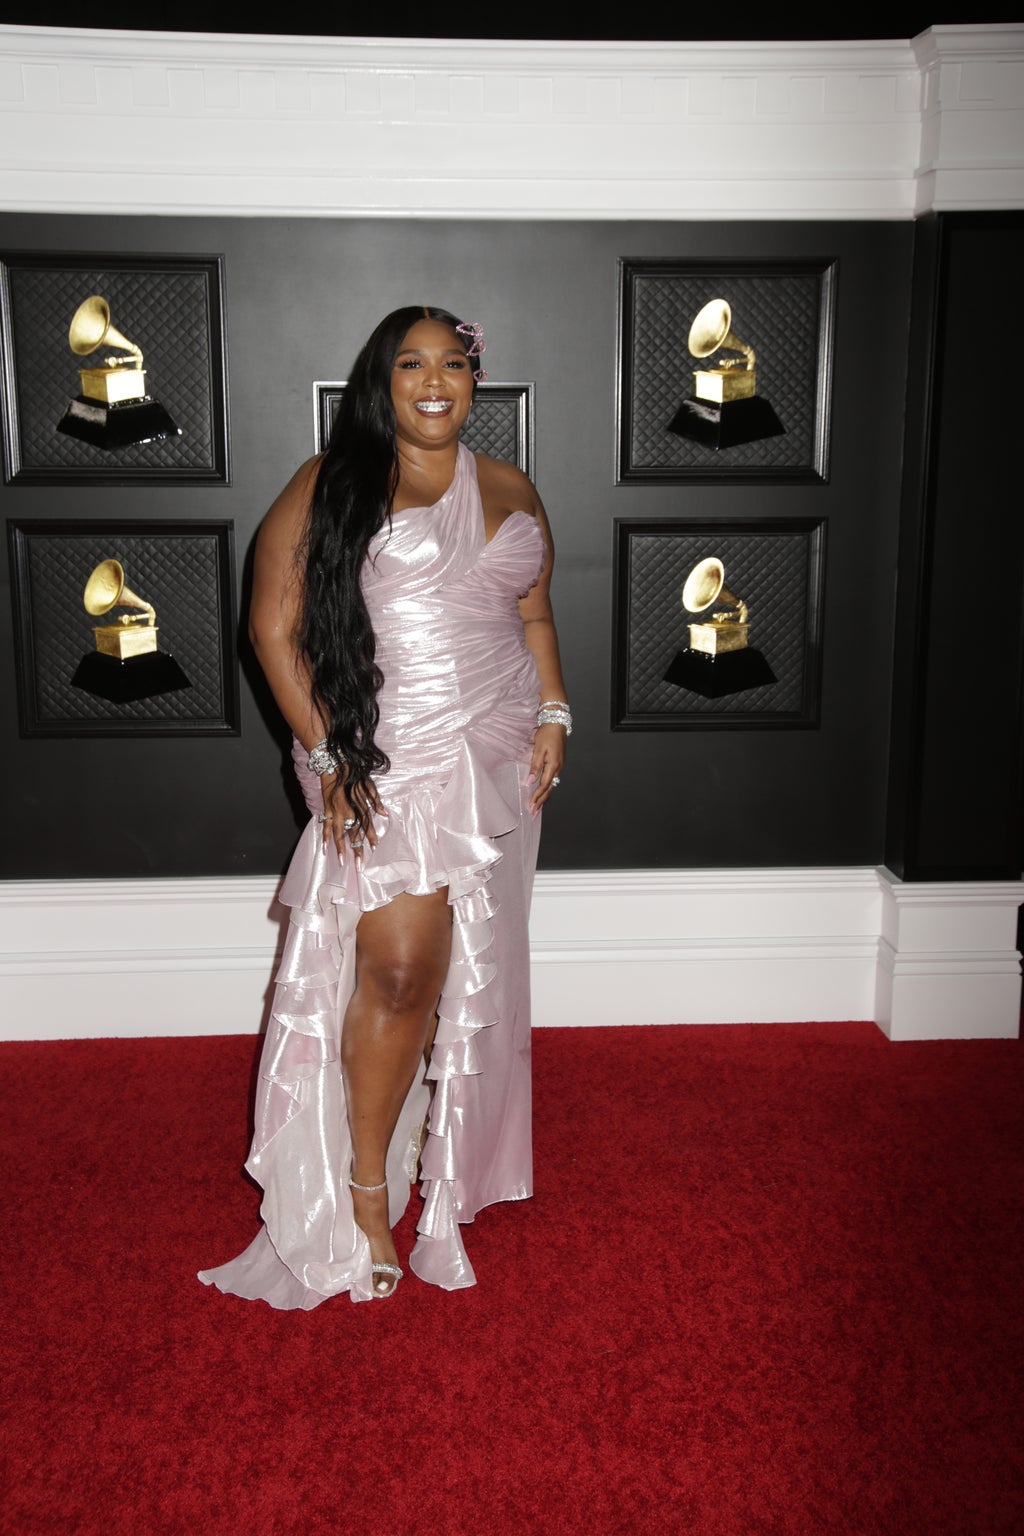 Lizzo at the 2021 Grammy Awards Red carpet